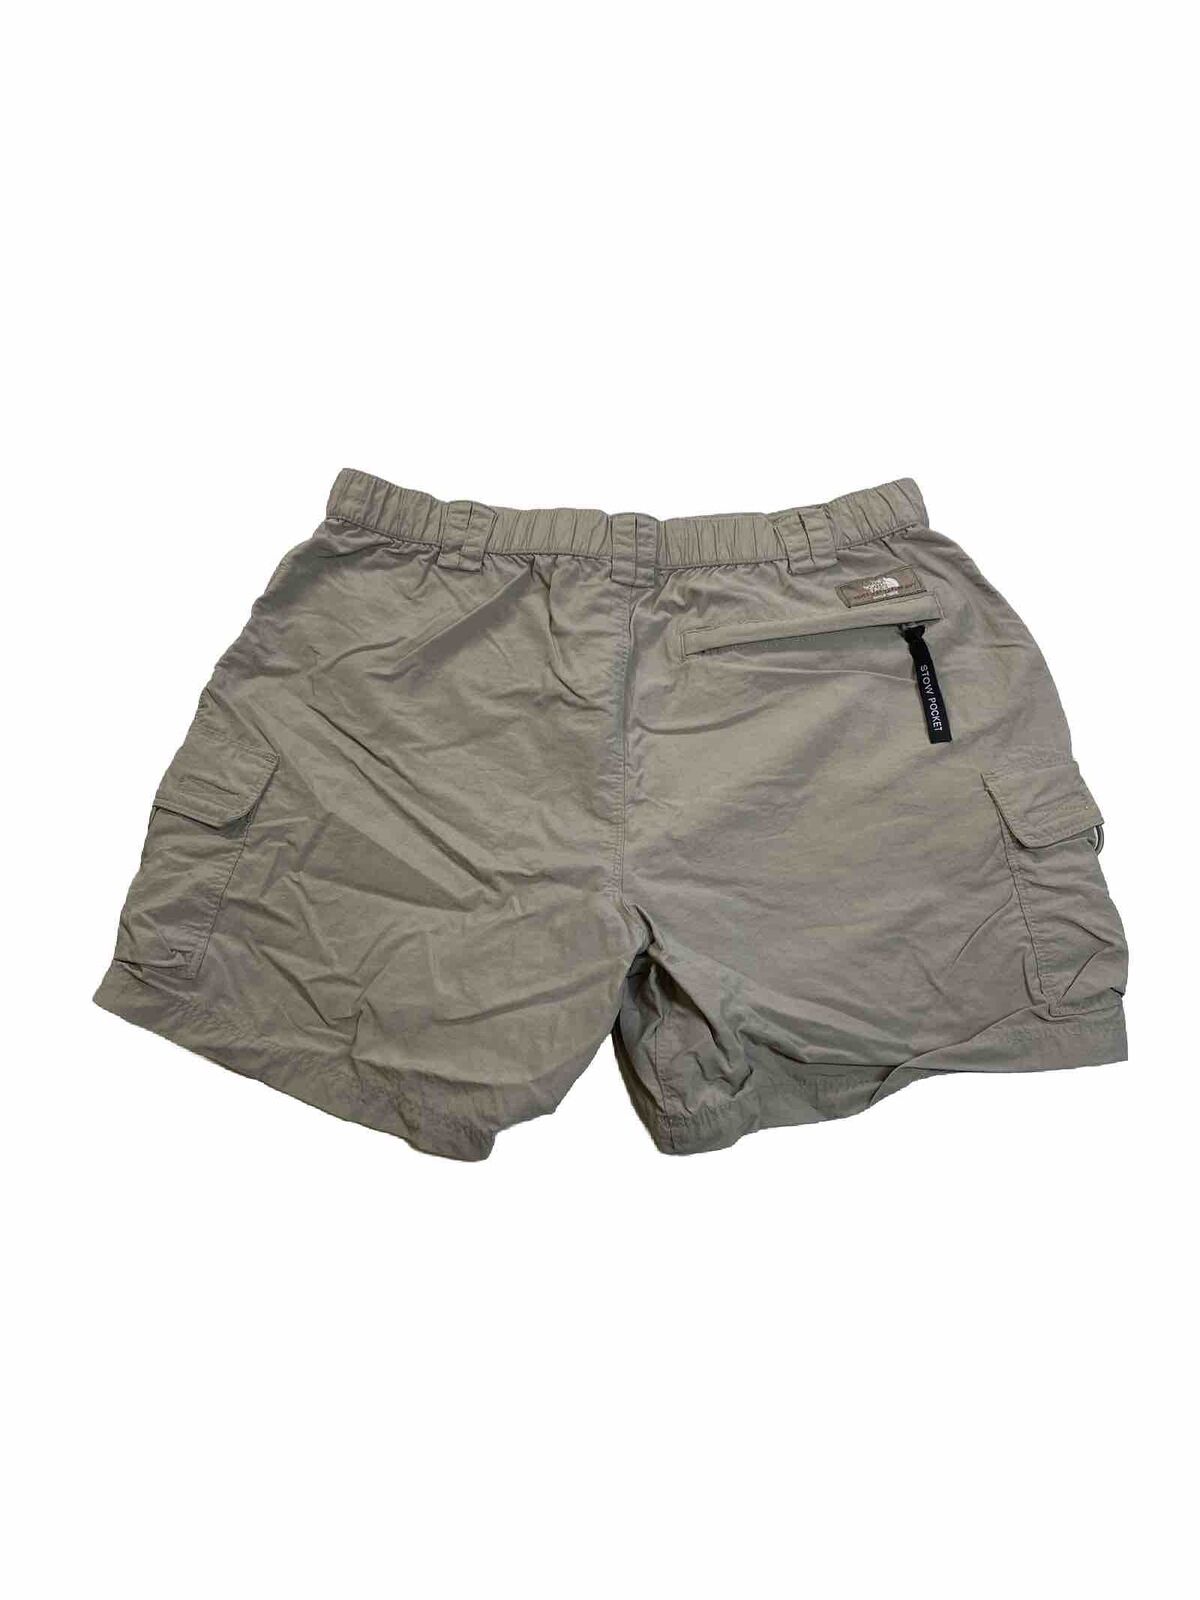 The North Face Women's Brown Cargo Hiking Shorts - S